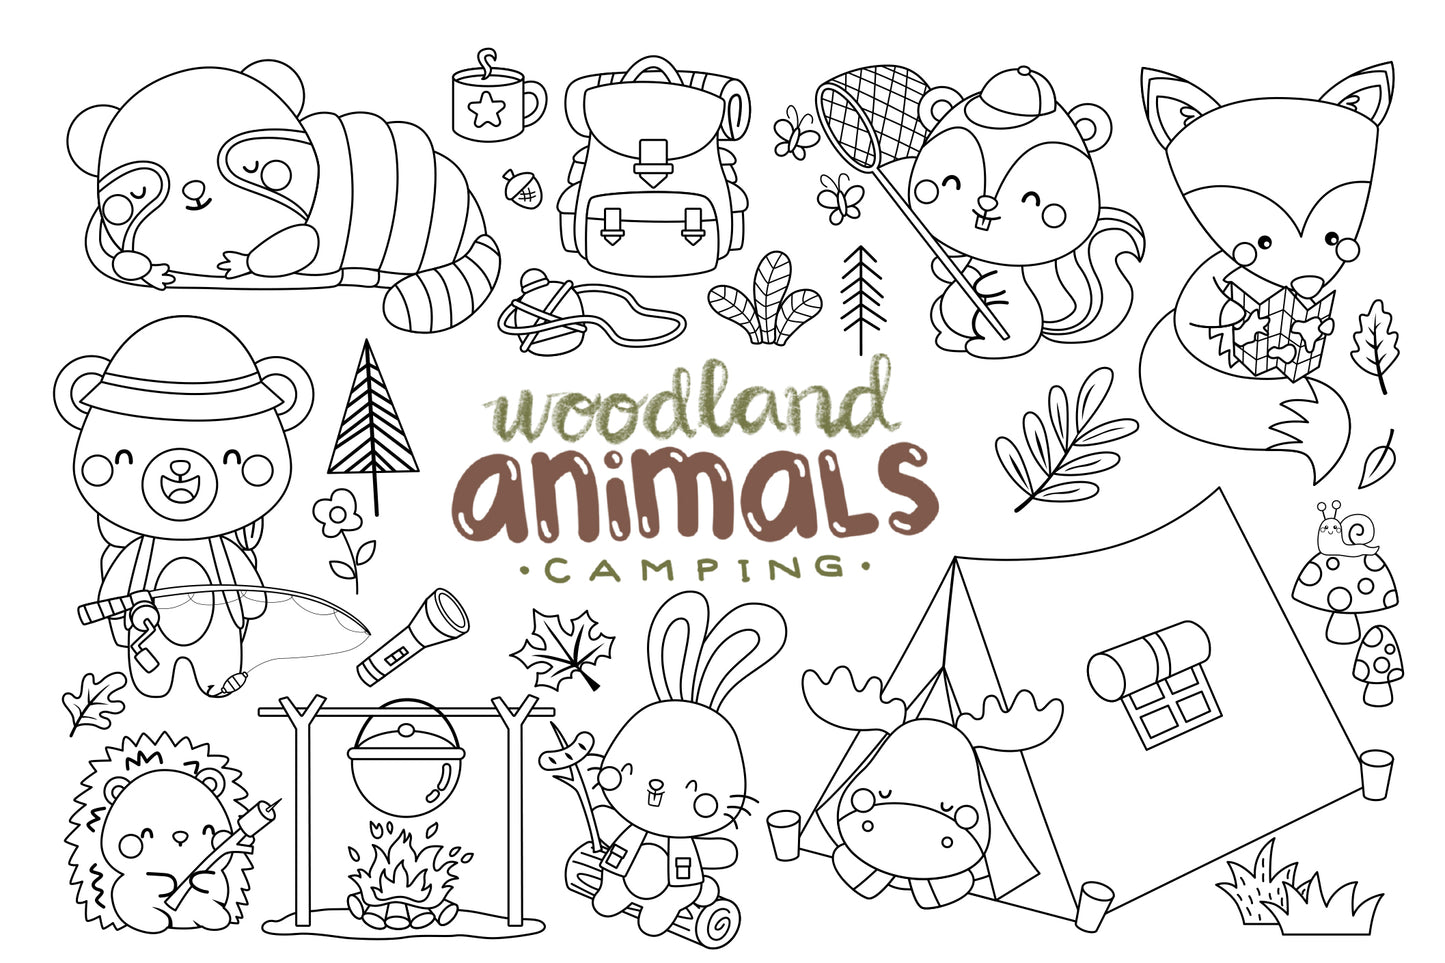 Animal and Camping Clipart - Cute Animal Coloring